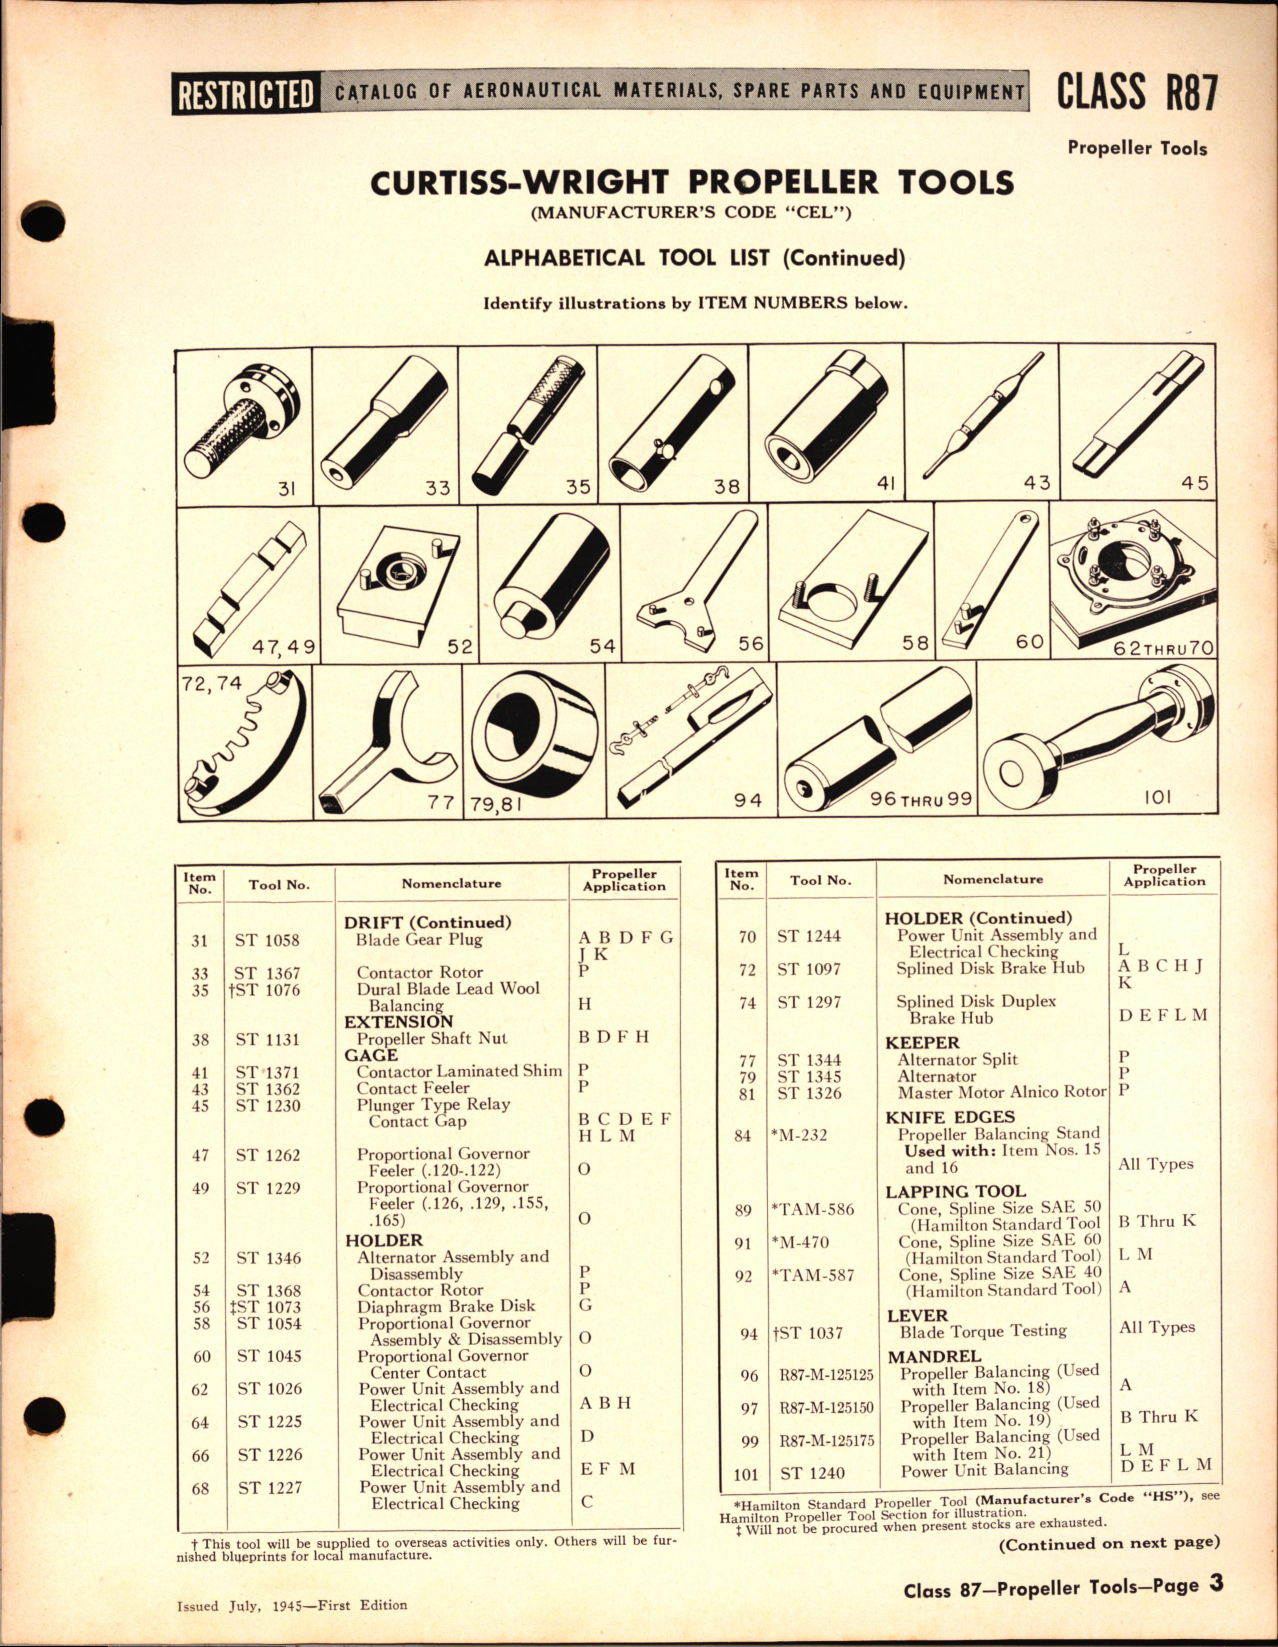 Sample page 3 from AirCorps Library document: Propeller Tools